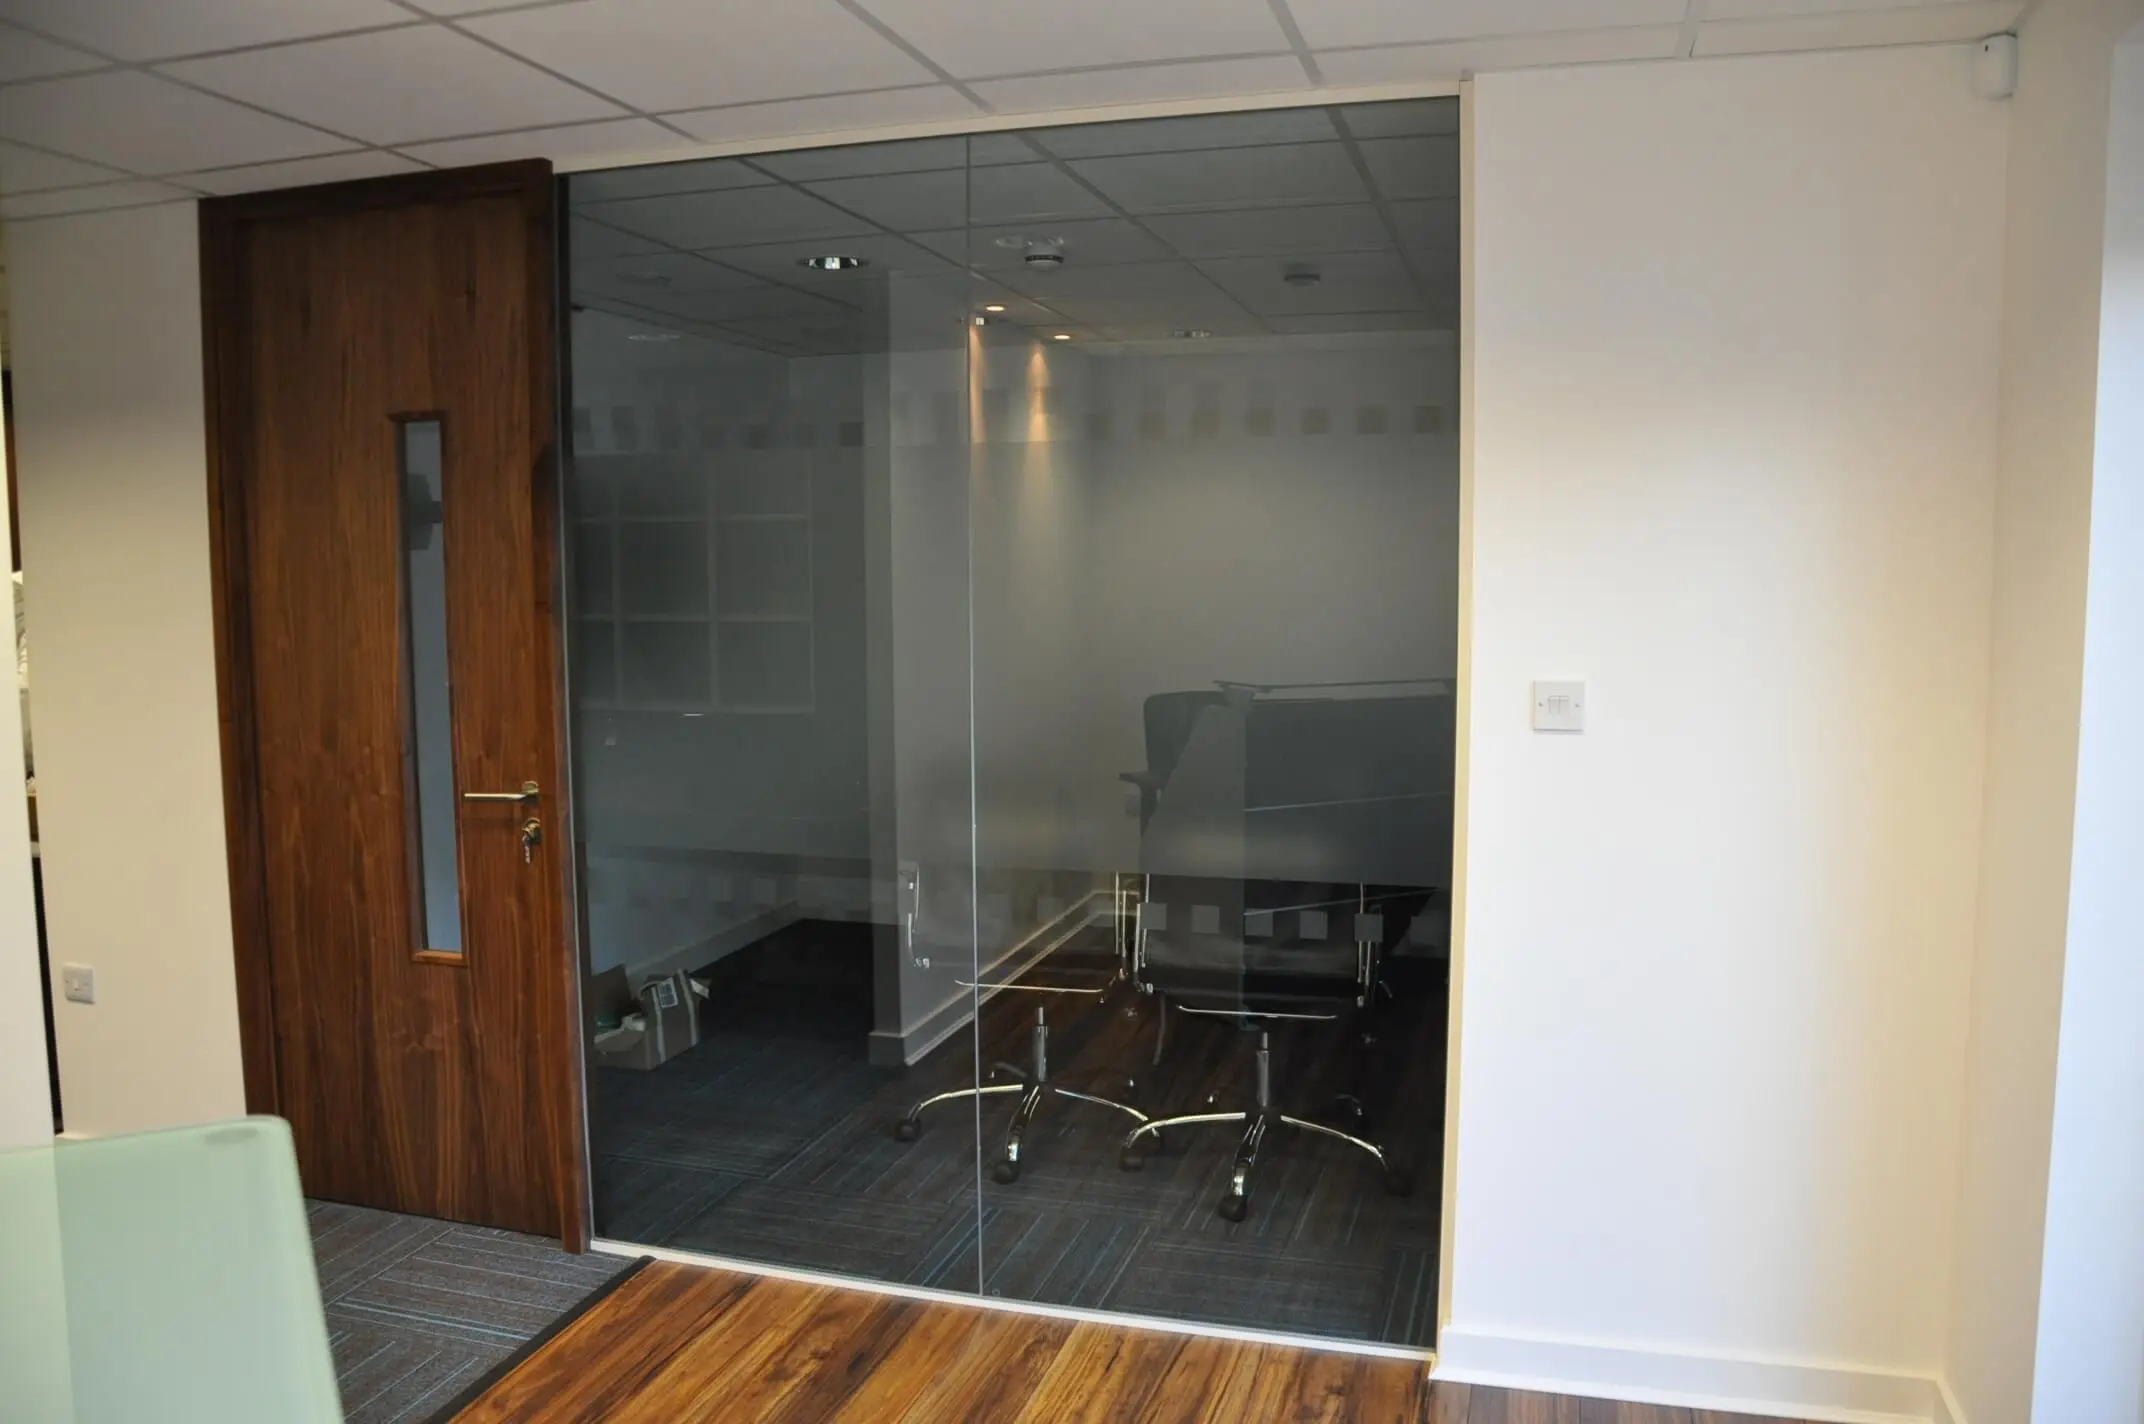 Meeting room glass partitions with solid wood finish doors